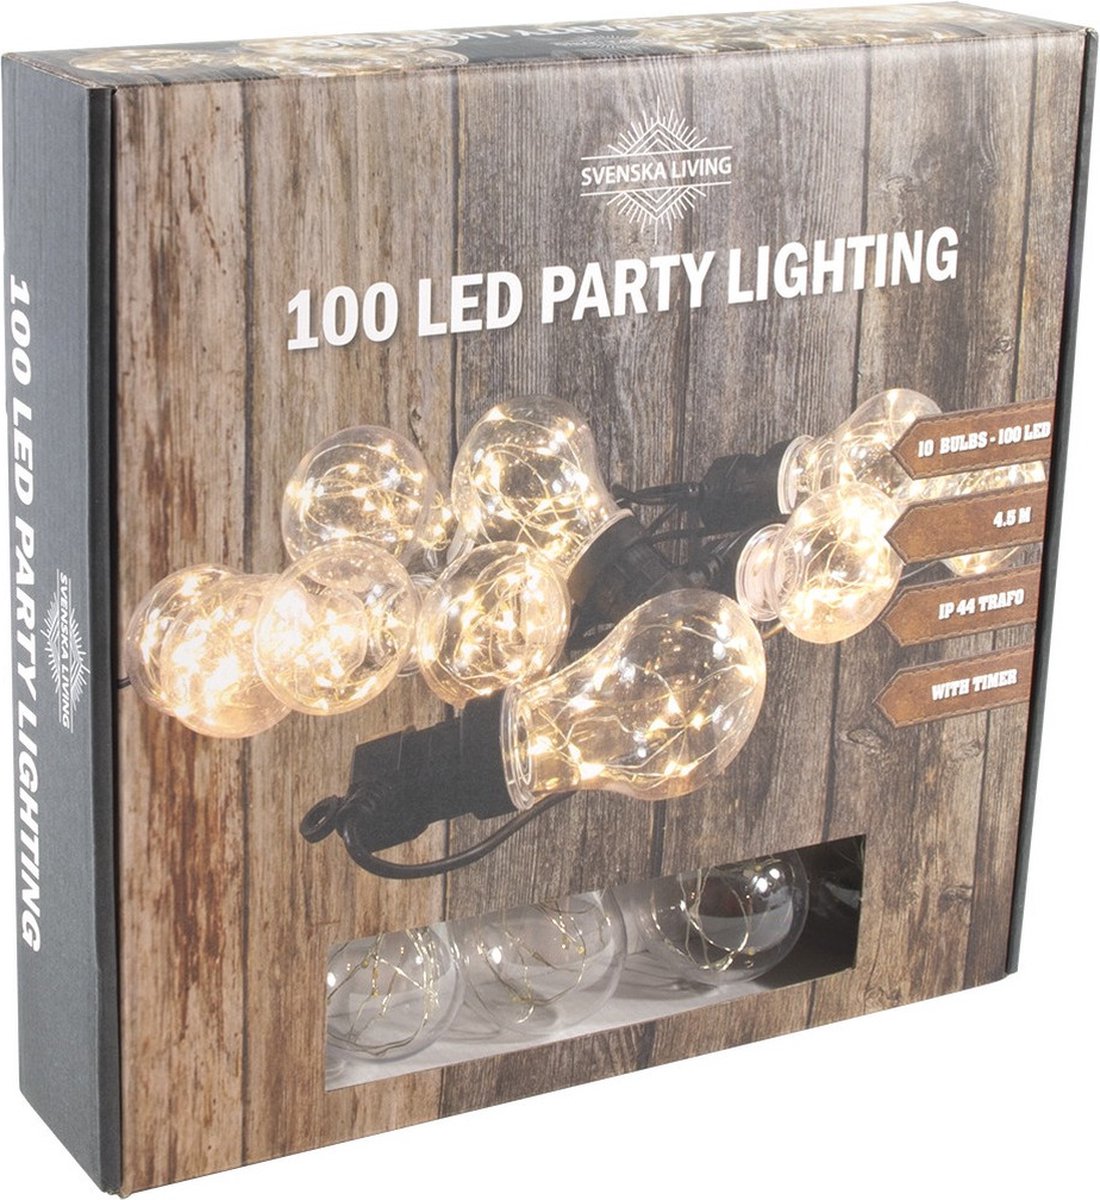 Partylight X10 100Warmled Ip44 Timer 3M 450Cm